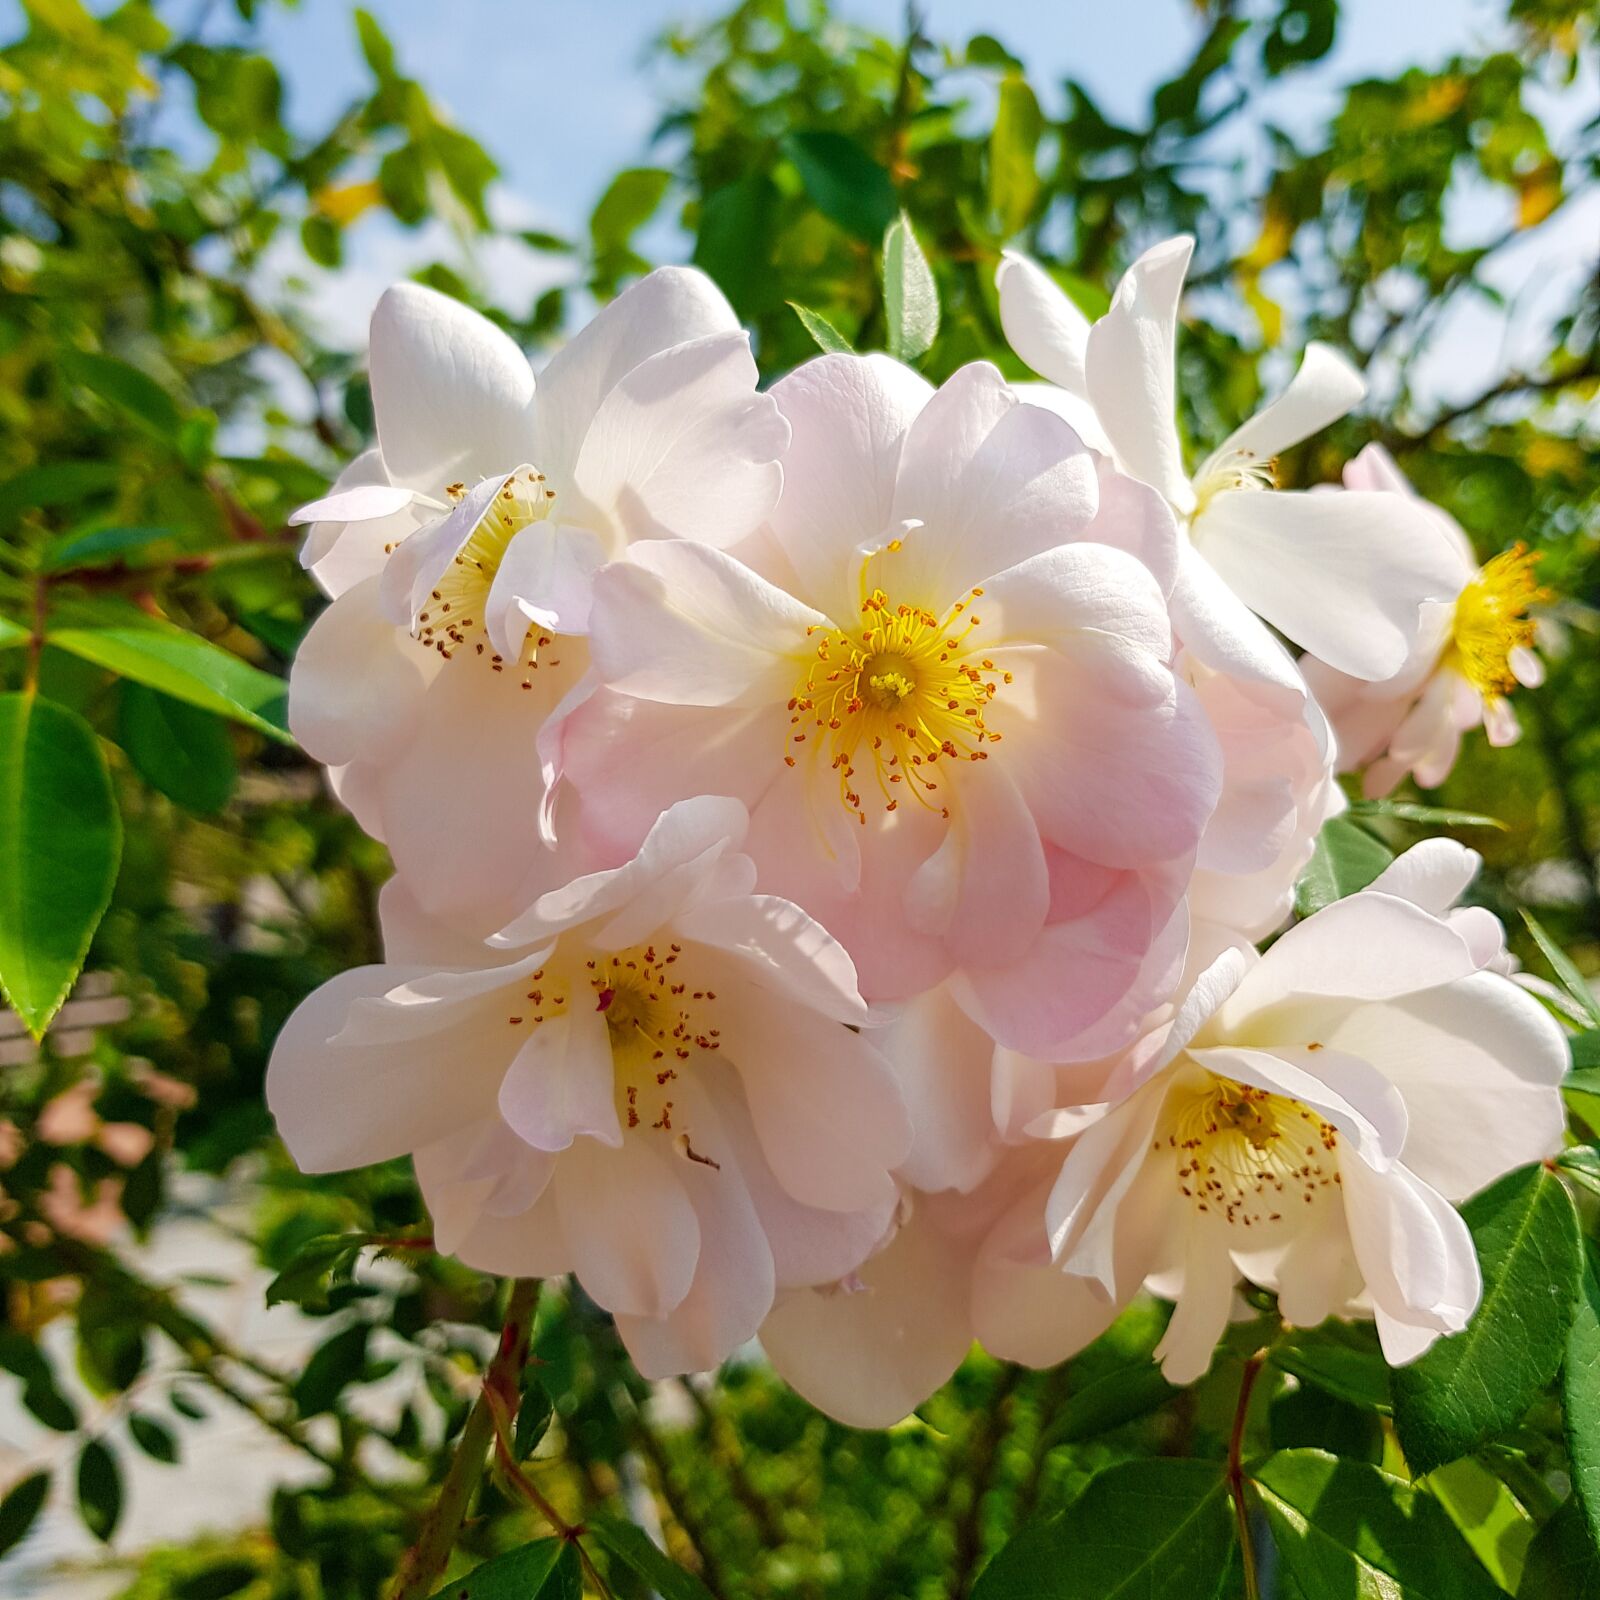 Samsung Galaxy S8+ Rear Camera sample photo. Flowers, white flowers, nature photography